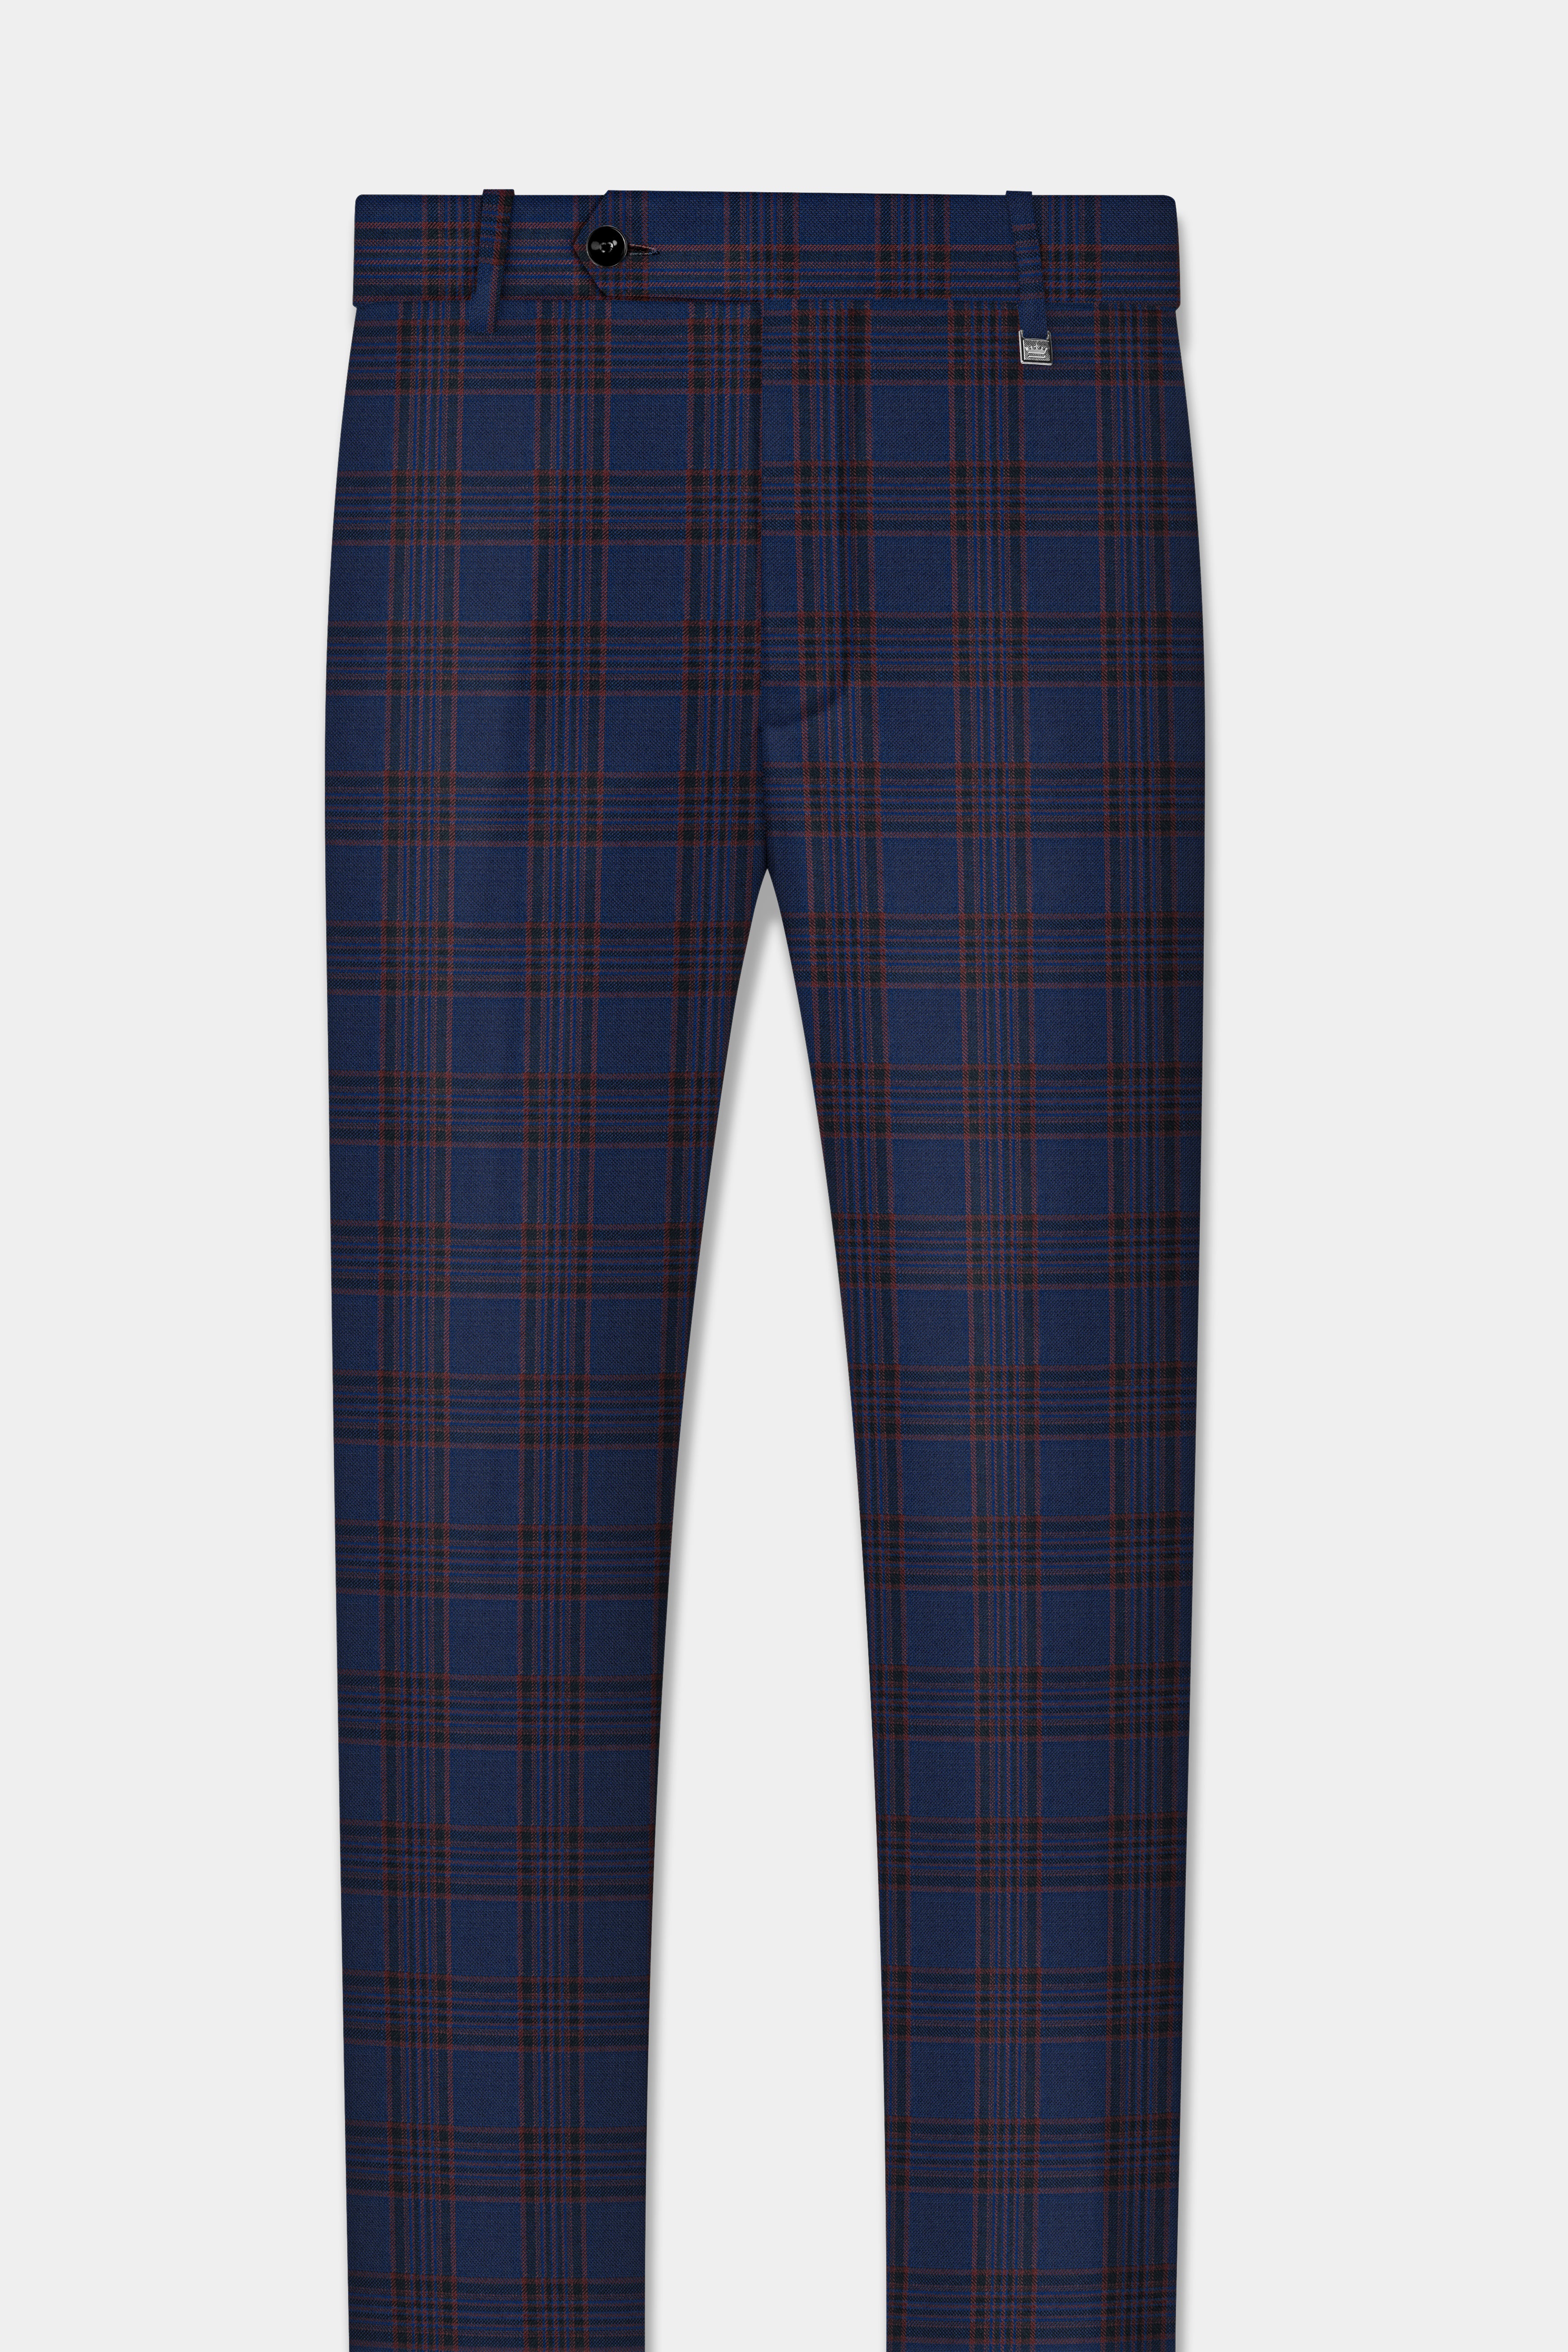 Bunting Blue with Livid Brown Plaid Wool Blend Pant